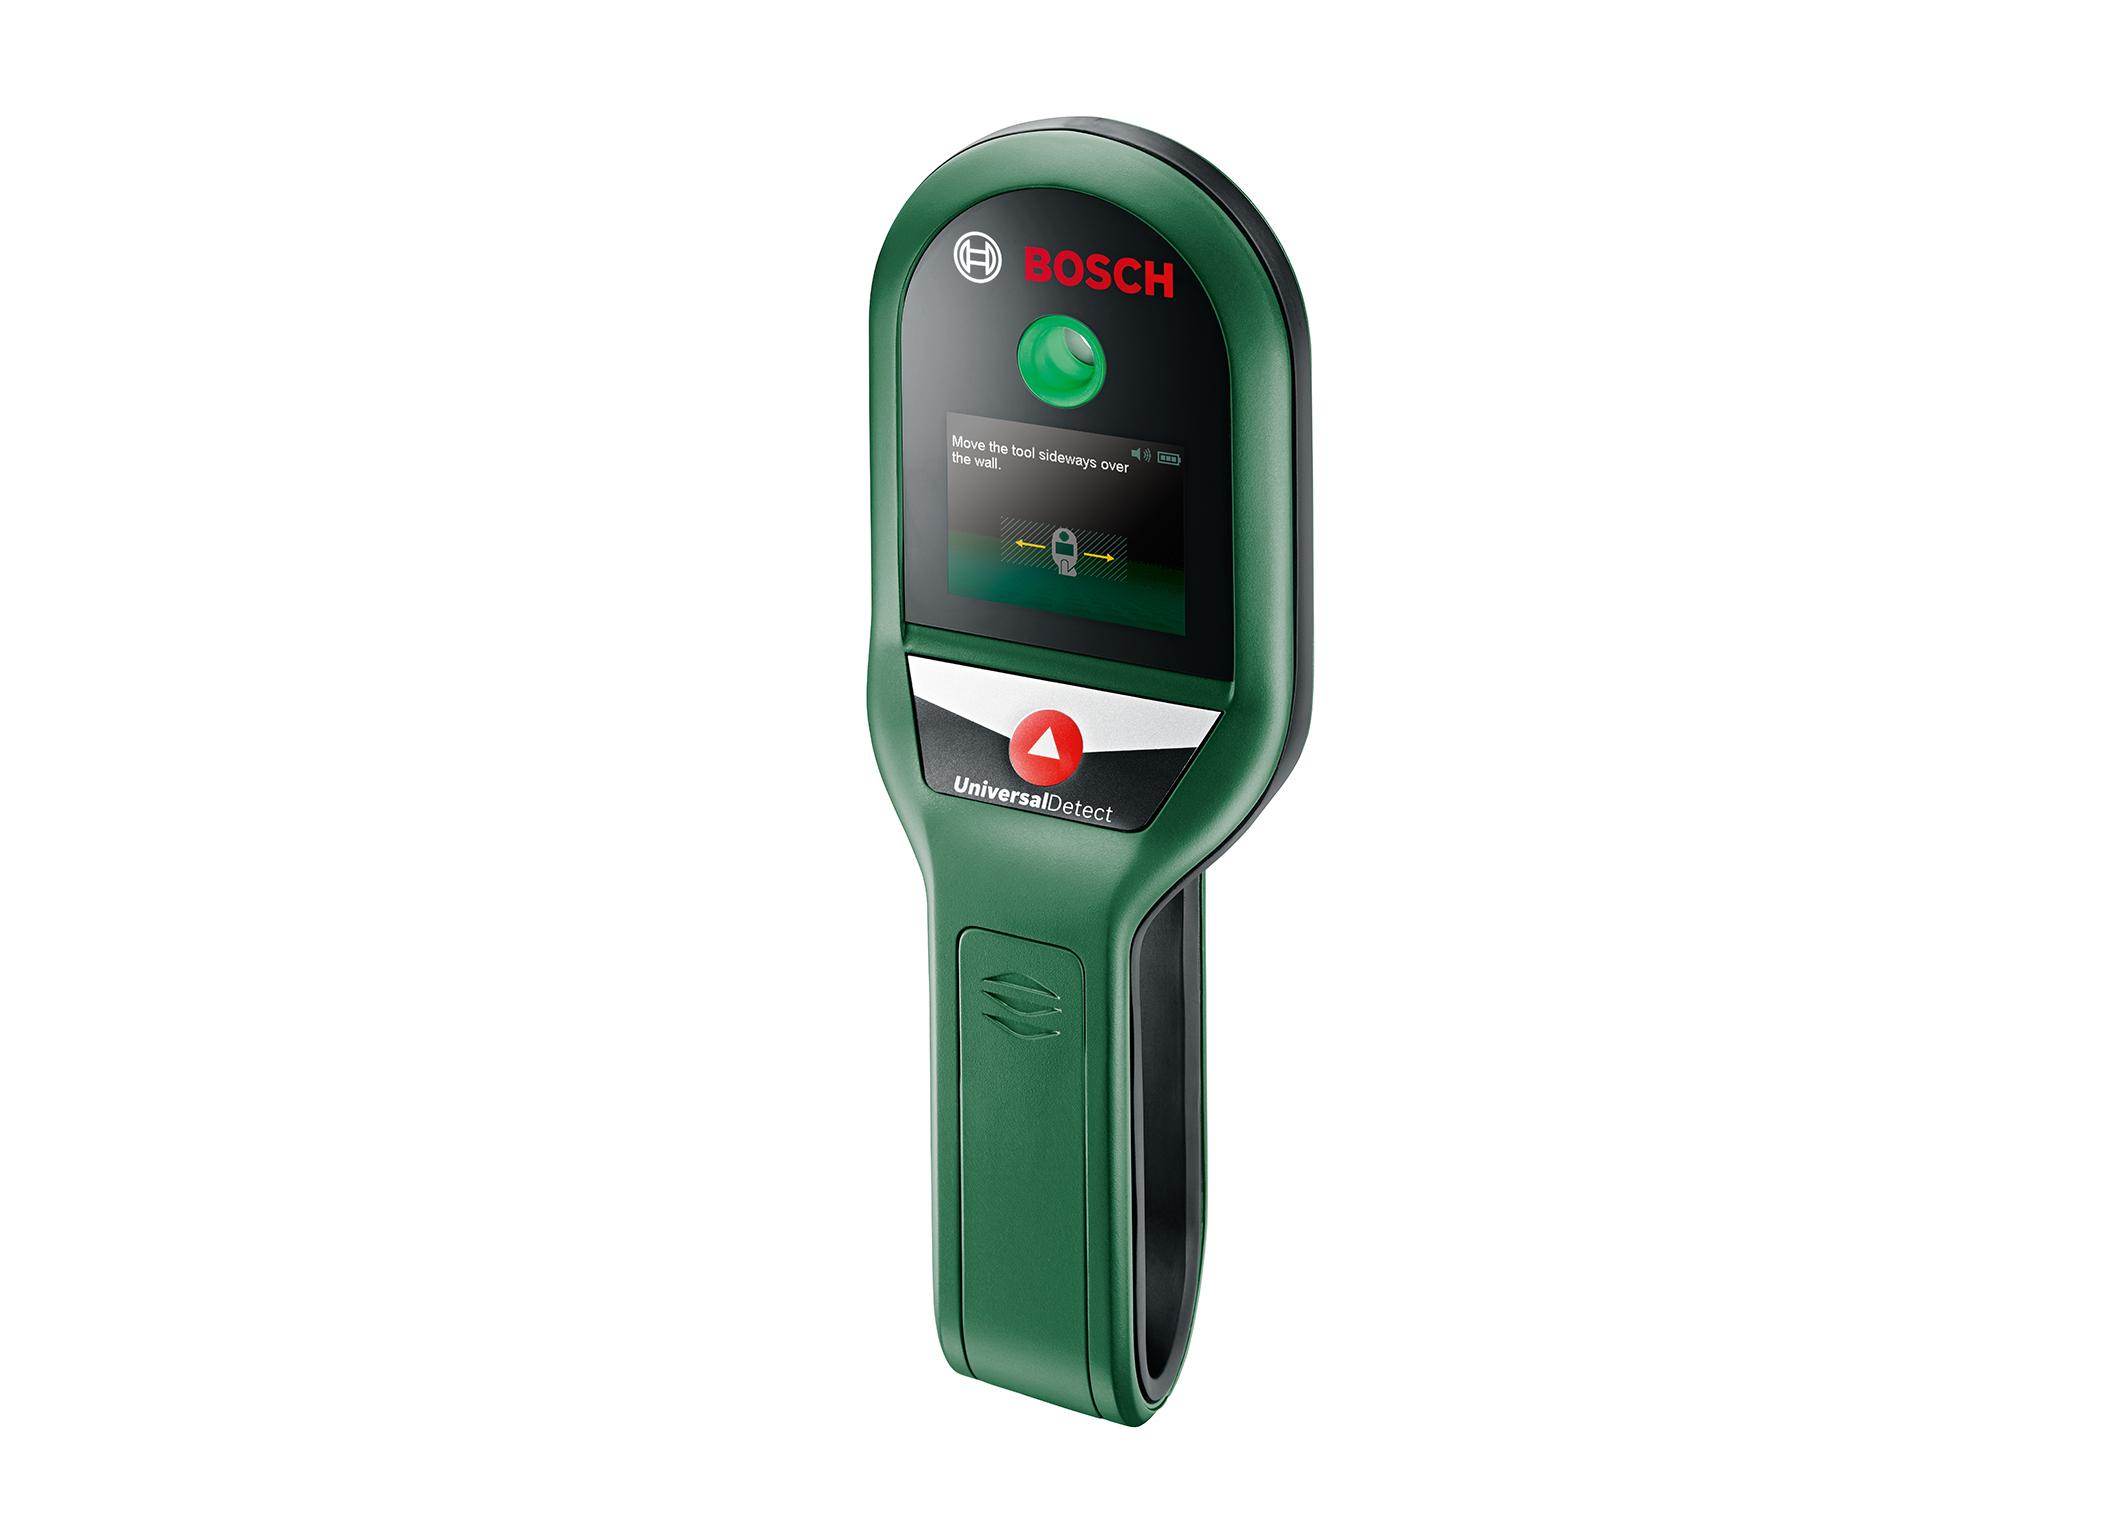 Intuitive - step-by-step instructions to simplify use: UniversalDetect digital detector from Bosch